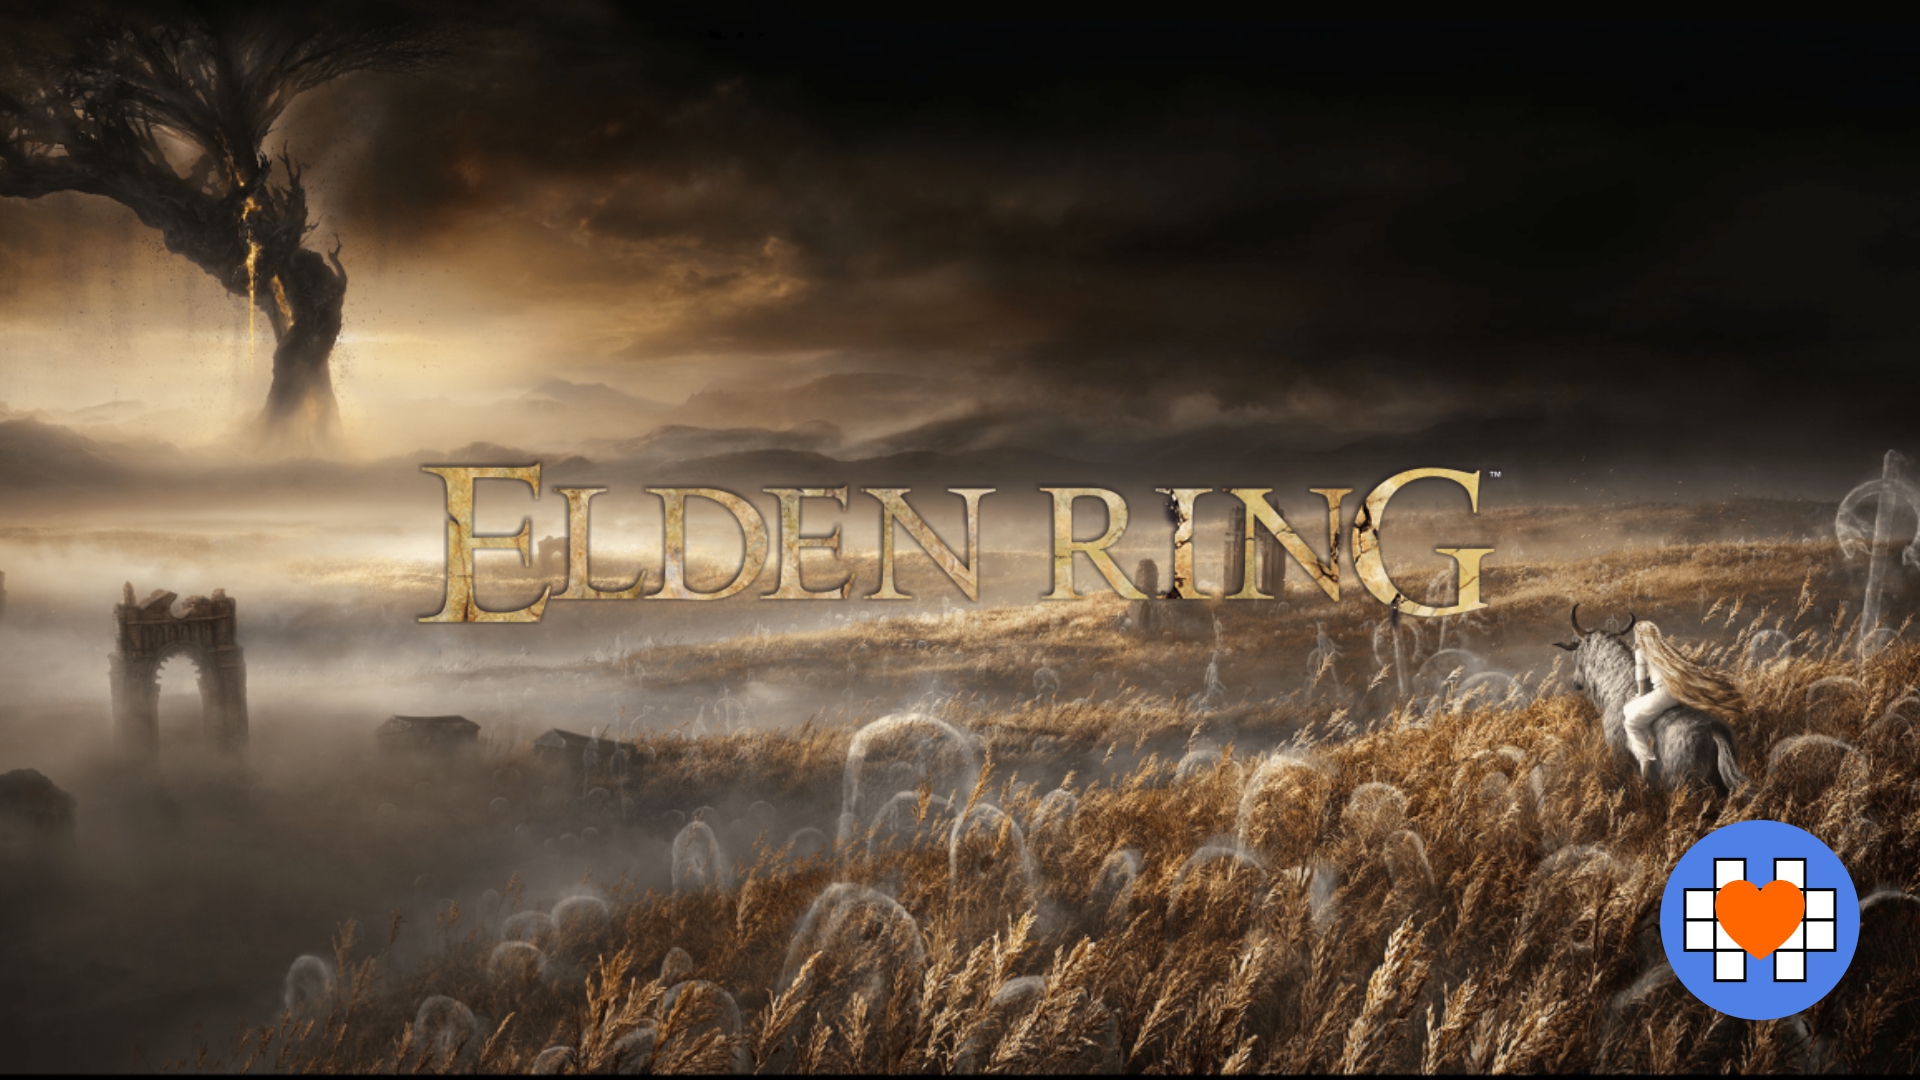 ELDEN RING on X: Rise, Tarnished, and let us walk a new path together. An  upcoming expansion for #ELDENRING Shadow of the Erdtree, is currently in  development. We hope you look forward